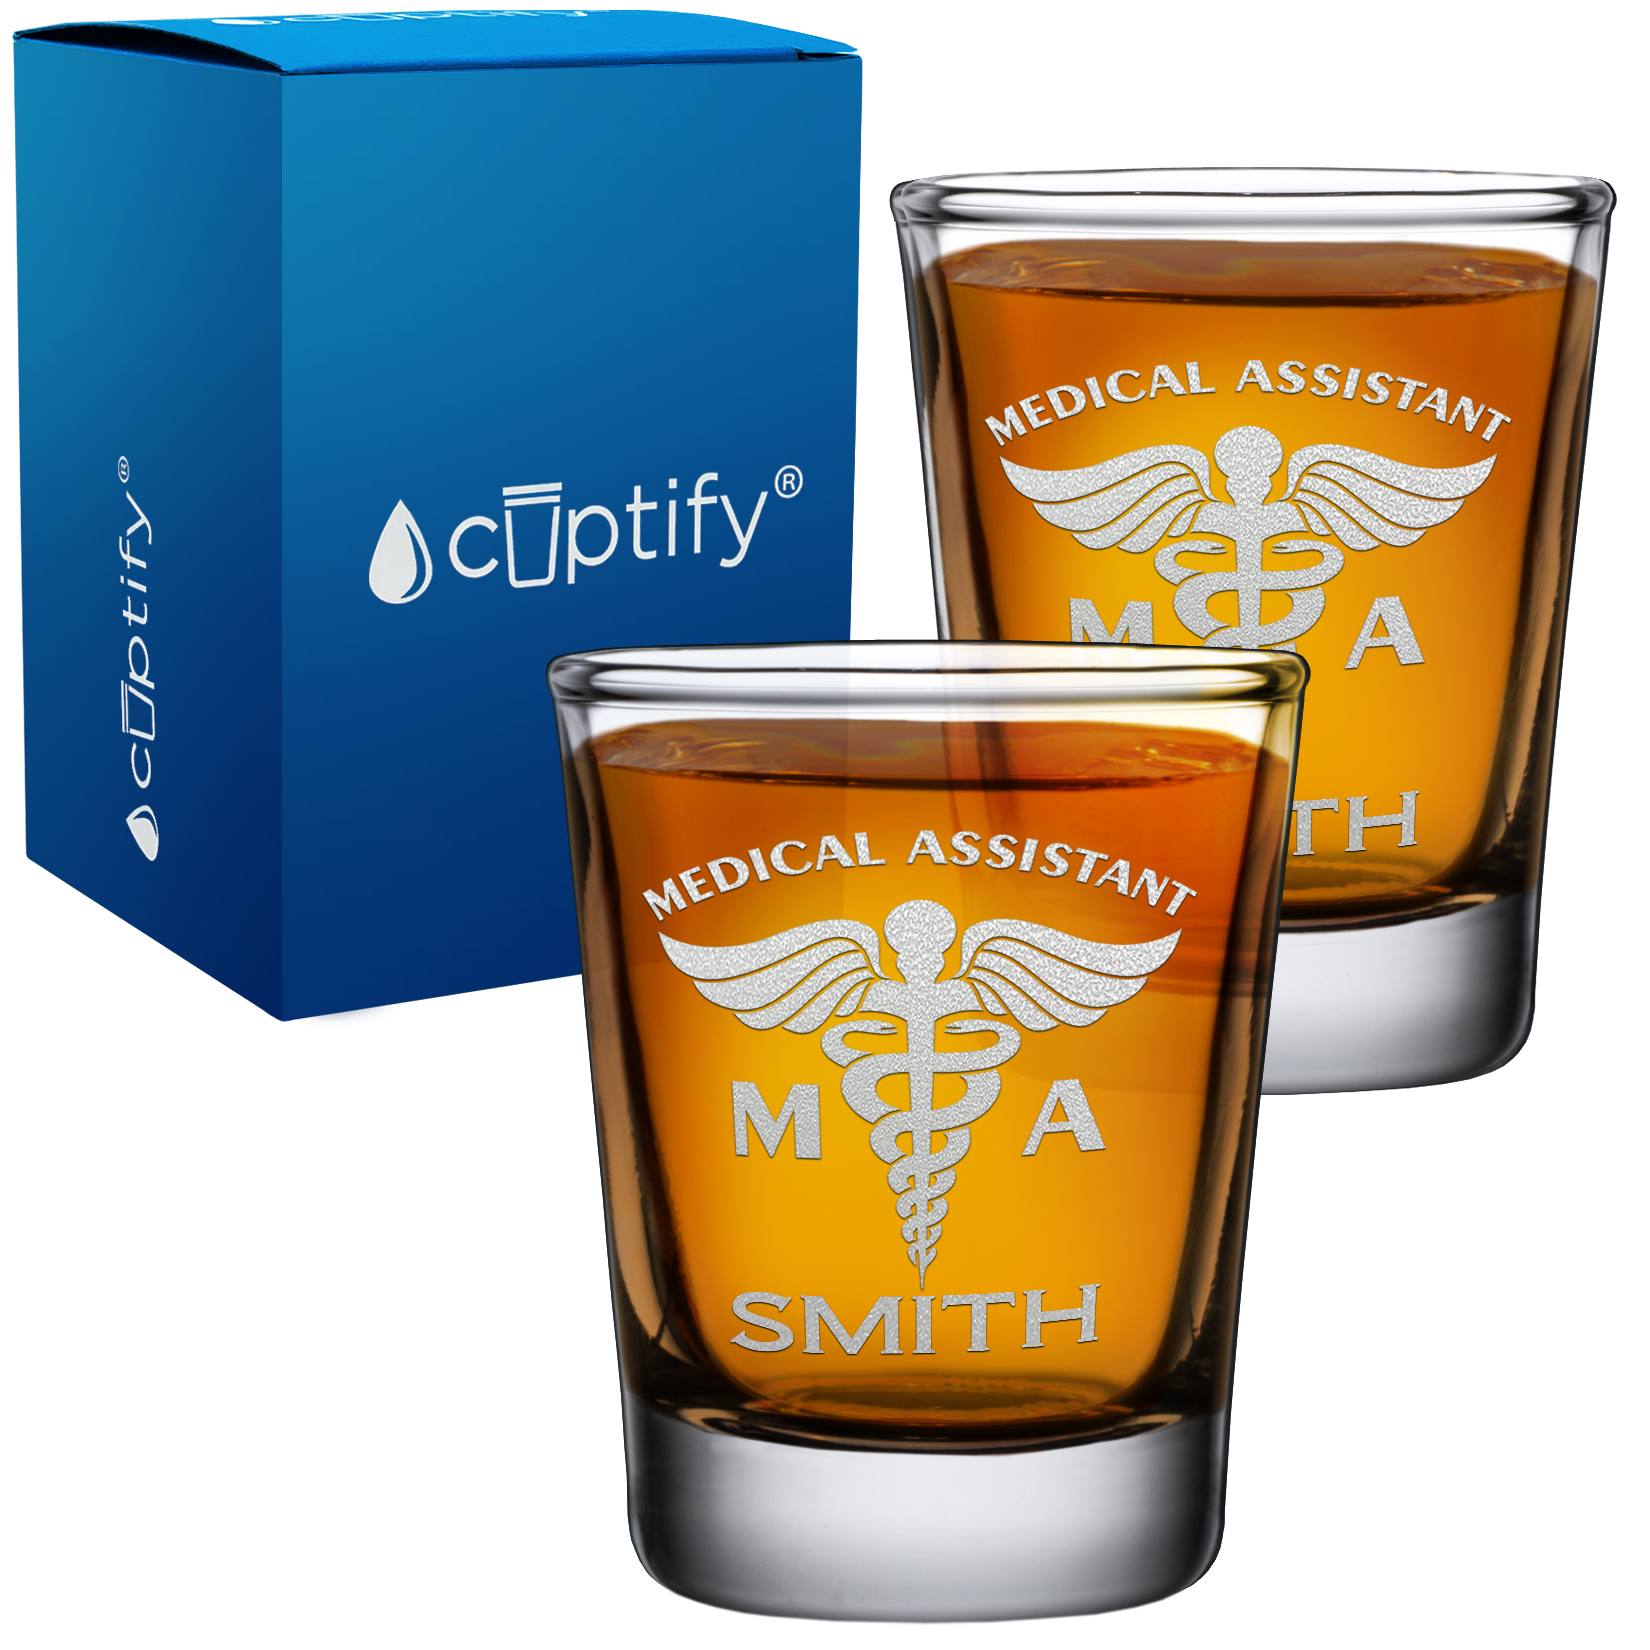 Personalized MA Medical Assistant on 2oz Shot Glasses - Set of 2